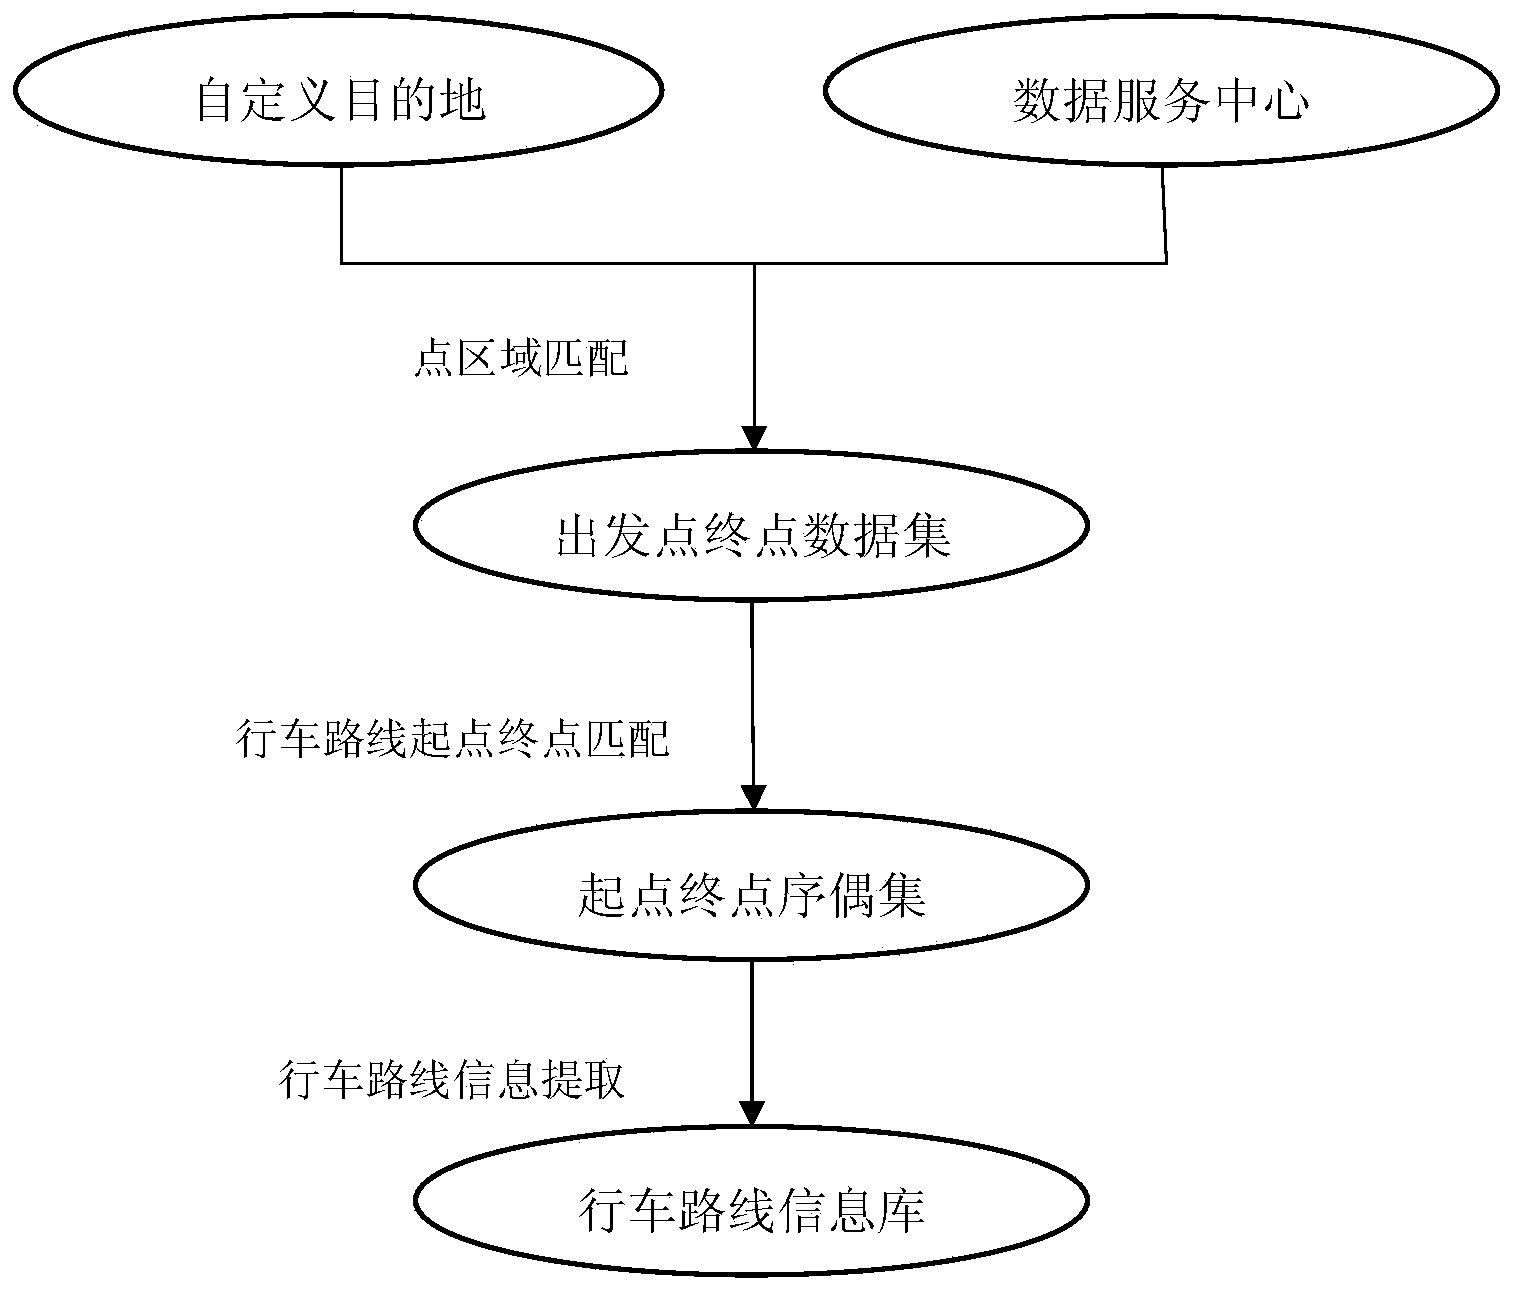 Extraction method of taxi driving track experience knowledge paths